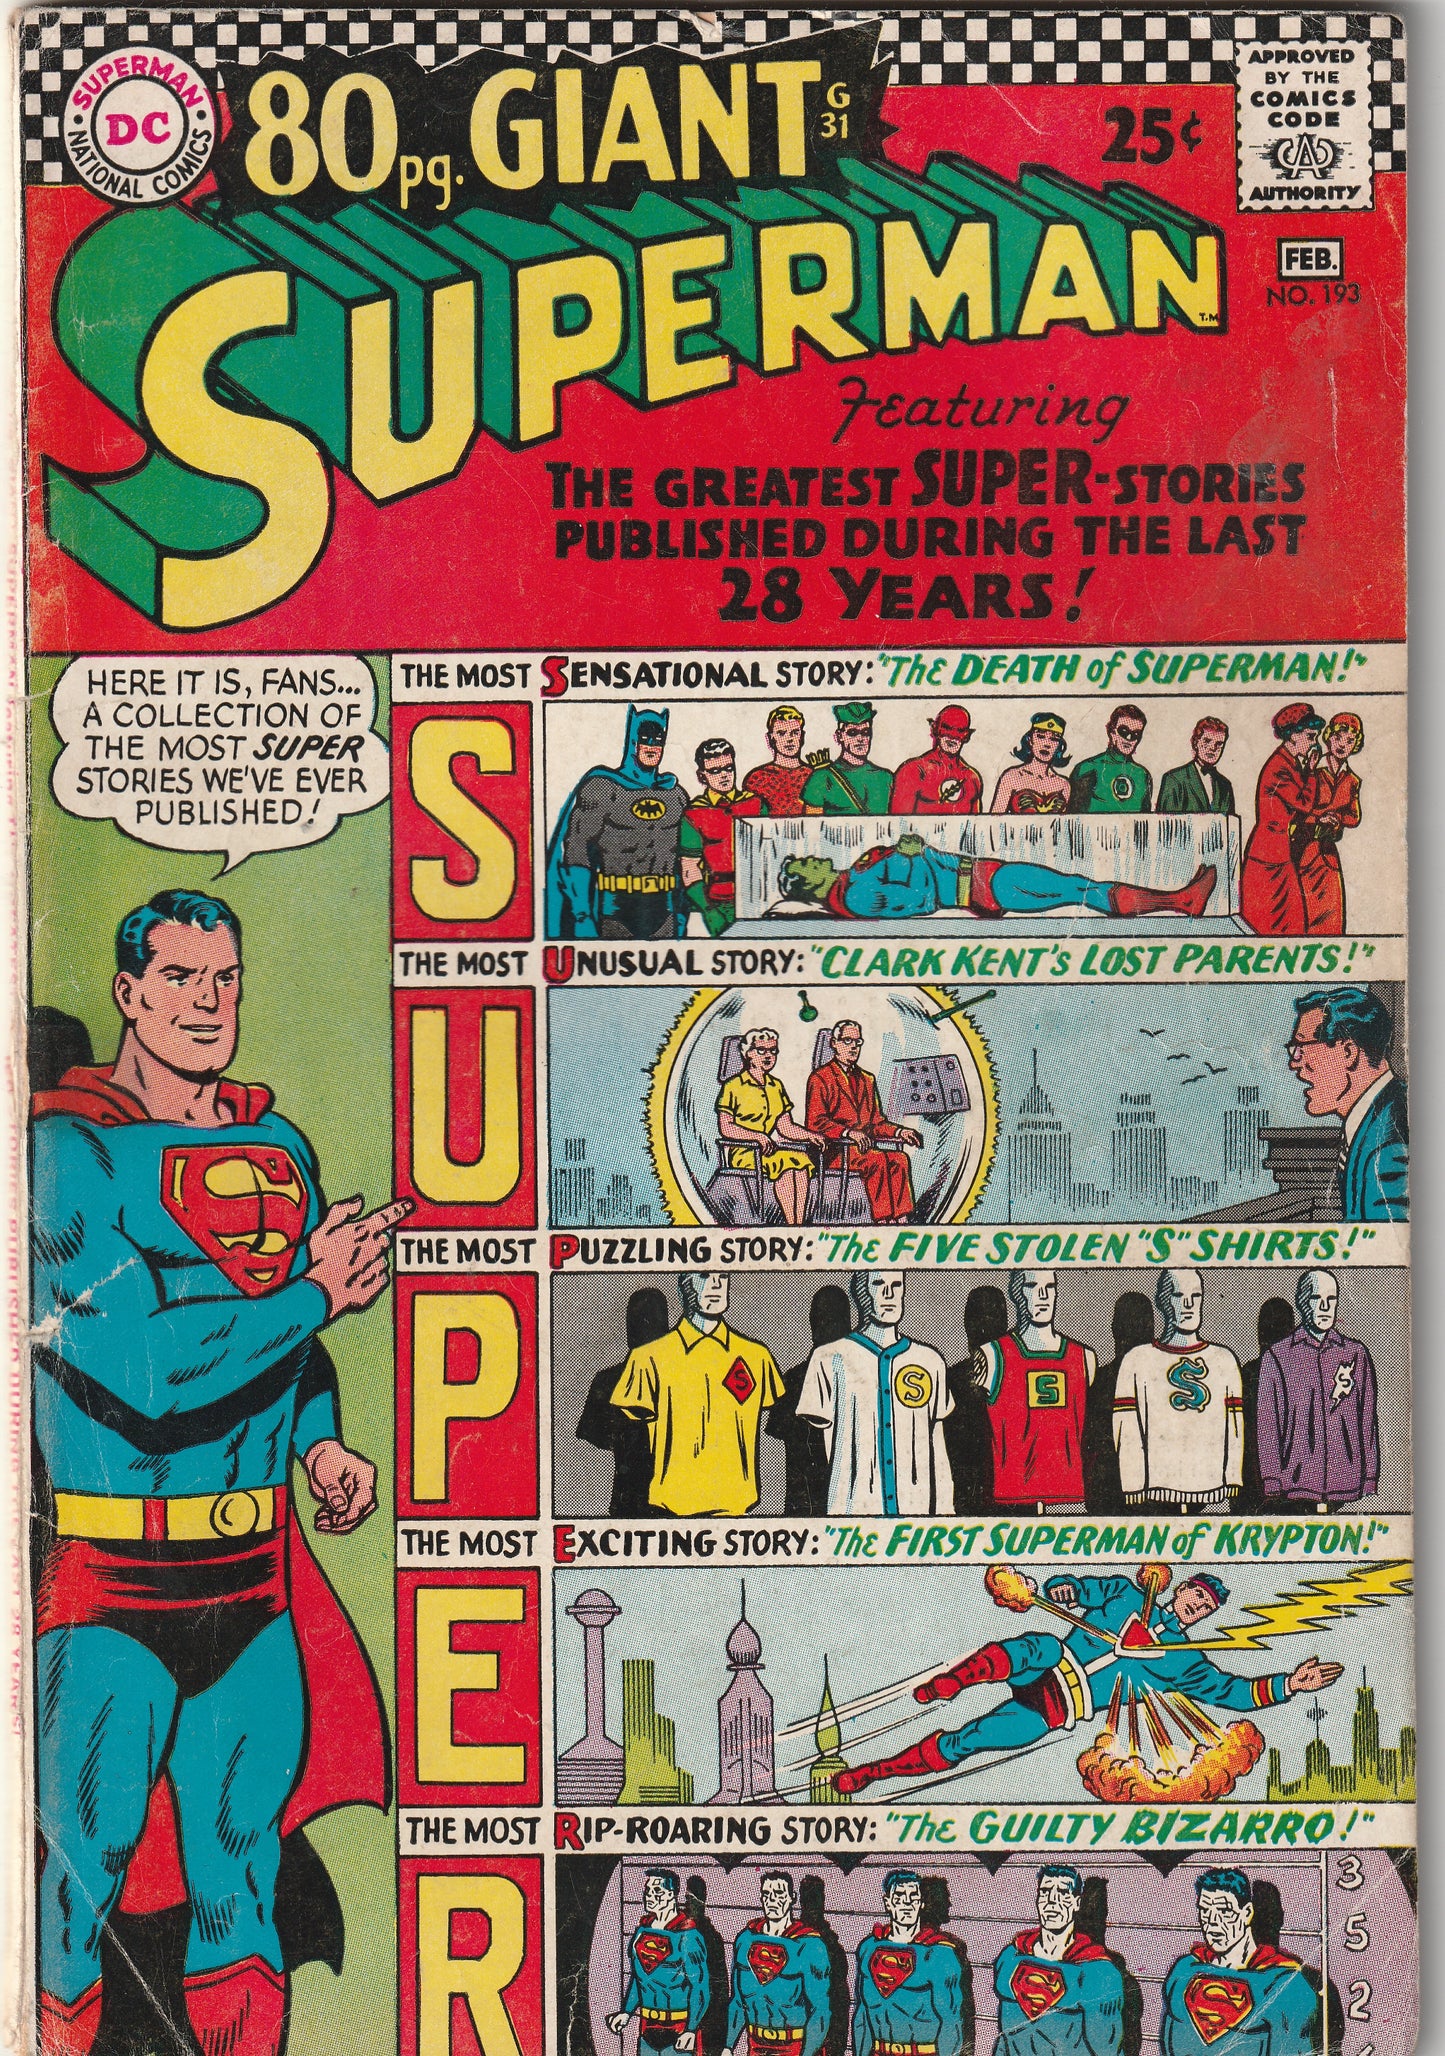 Superman #193 (1967) - 80 Page Giant